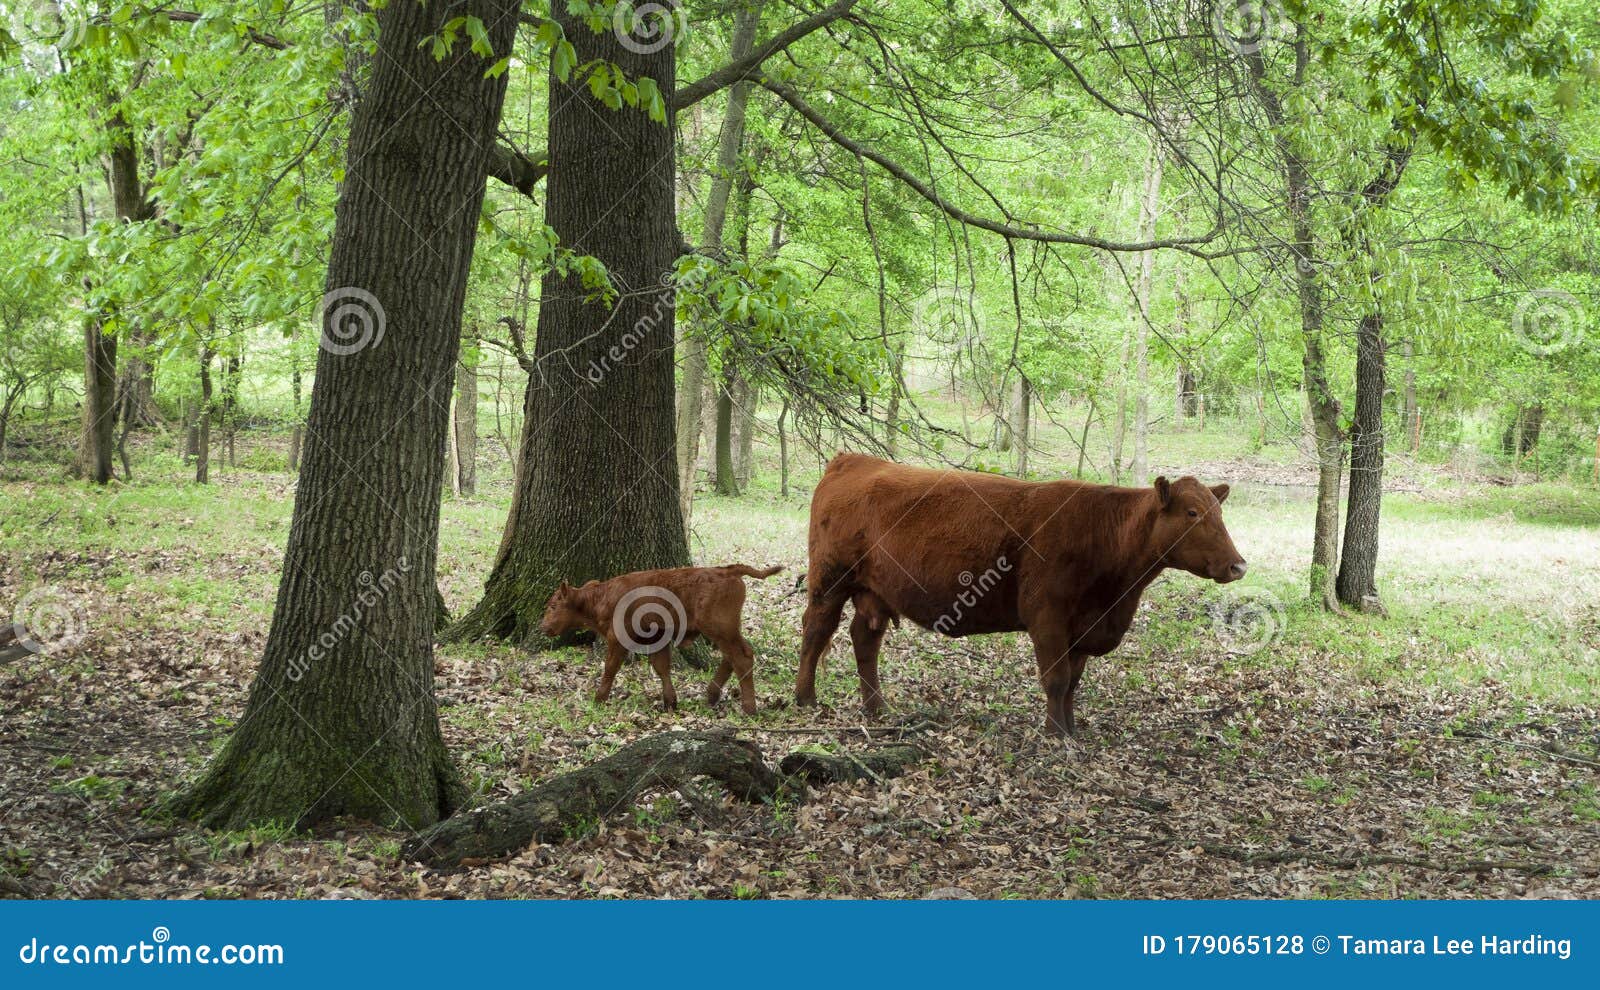 Cow And Calf In A Wooded Pasture Stock Photo Image Of Trees Mammals